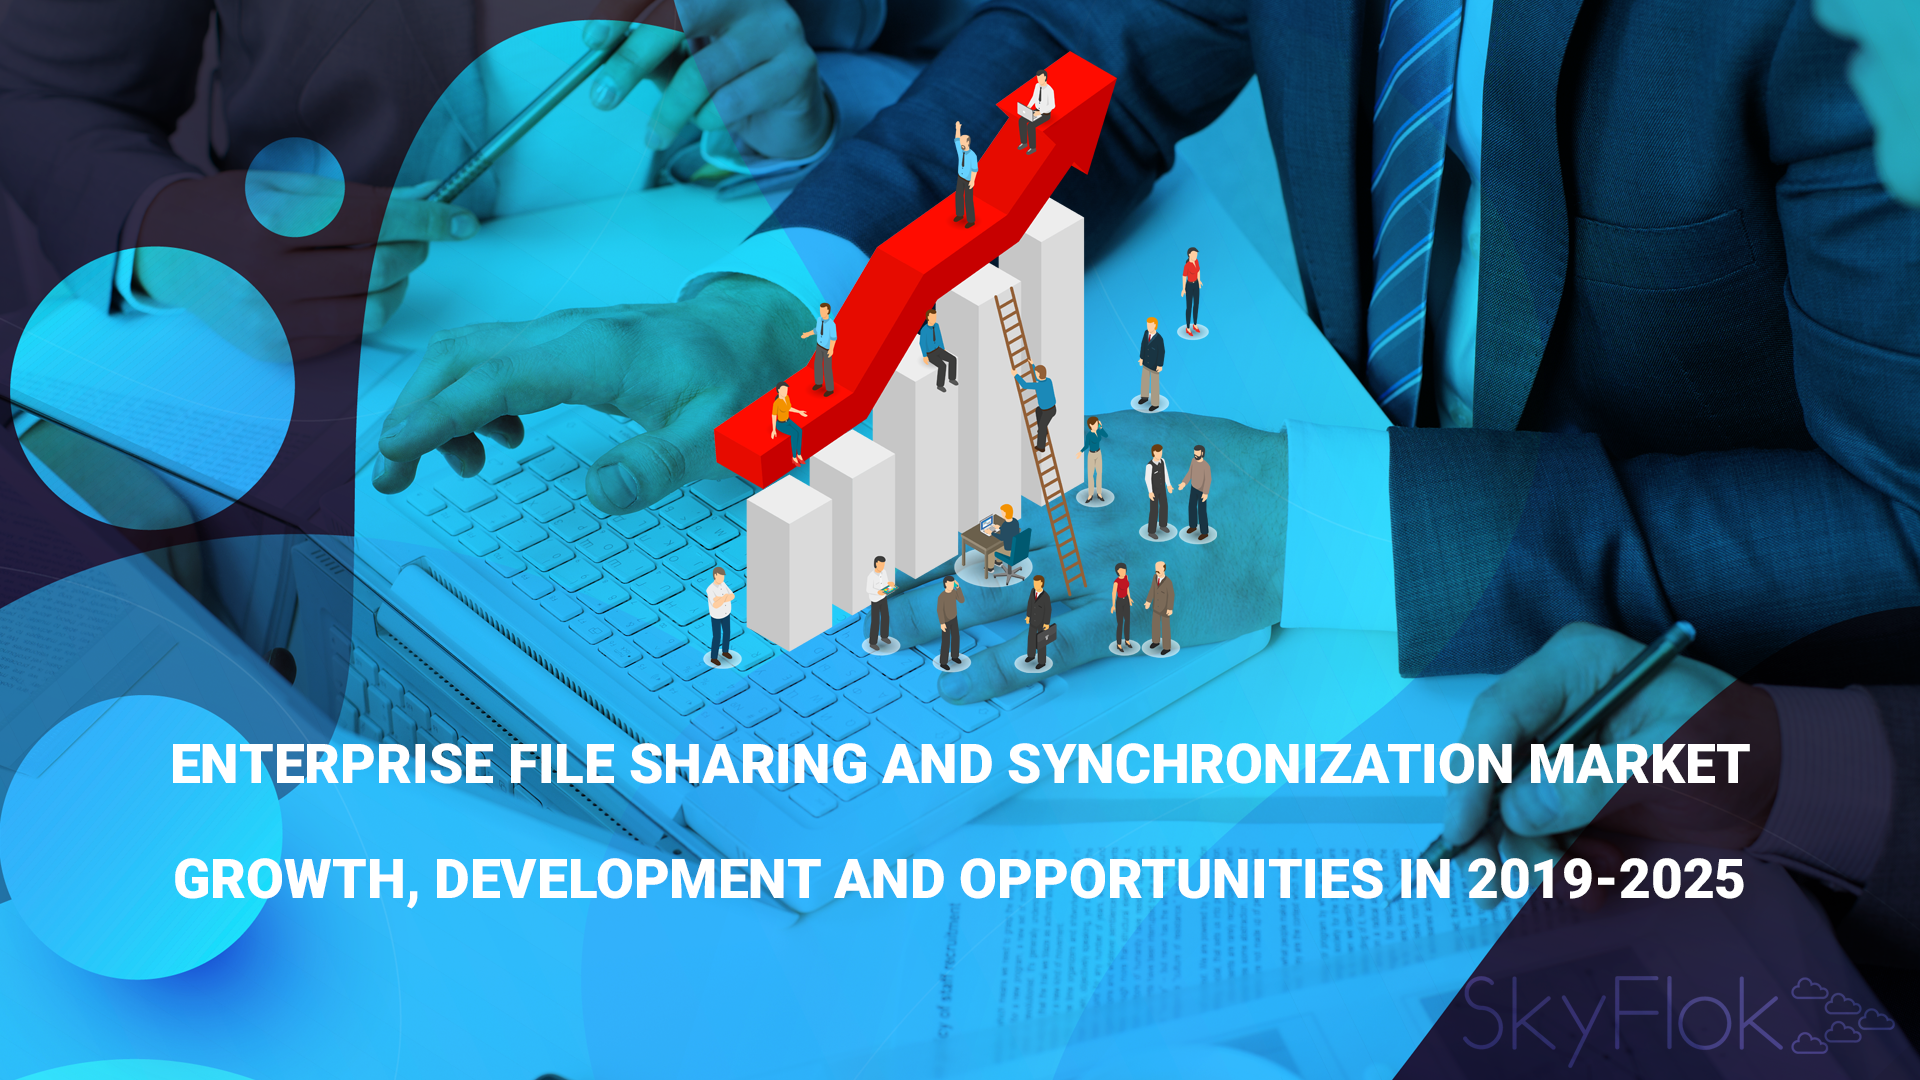 You are currently viewing Enterprise File Sharing and Synchronization Market Growth, Development and Opportunities in 2019-2025